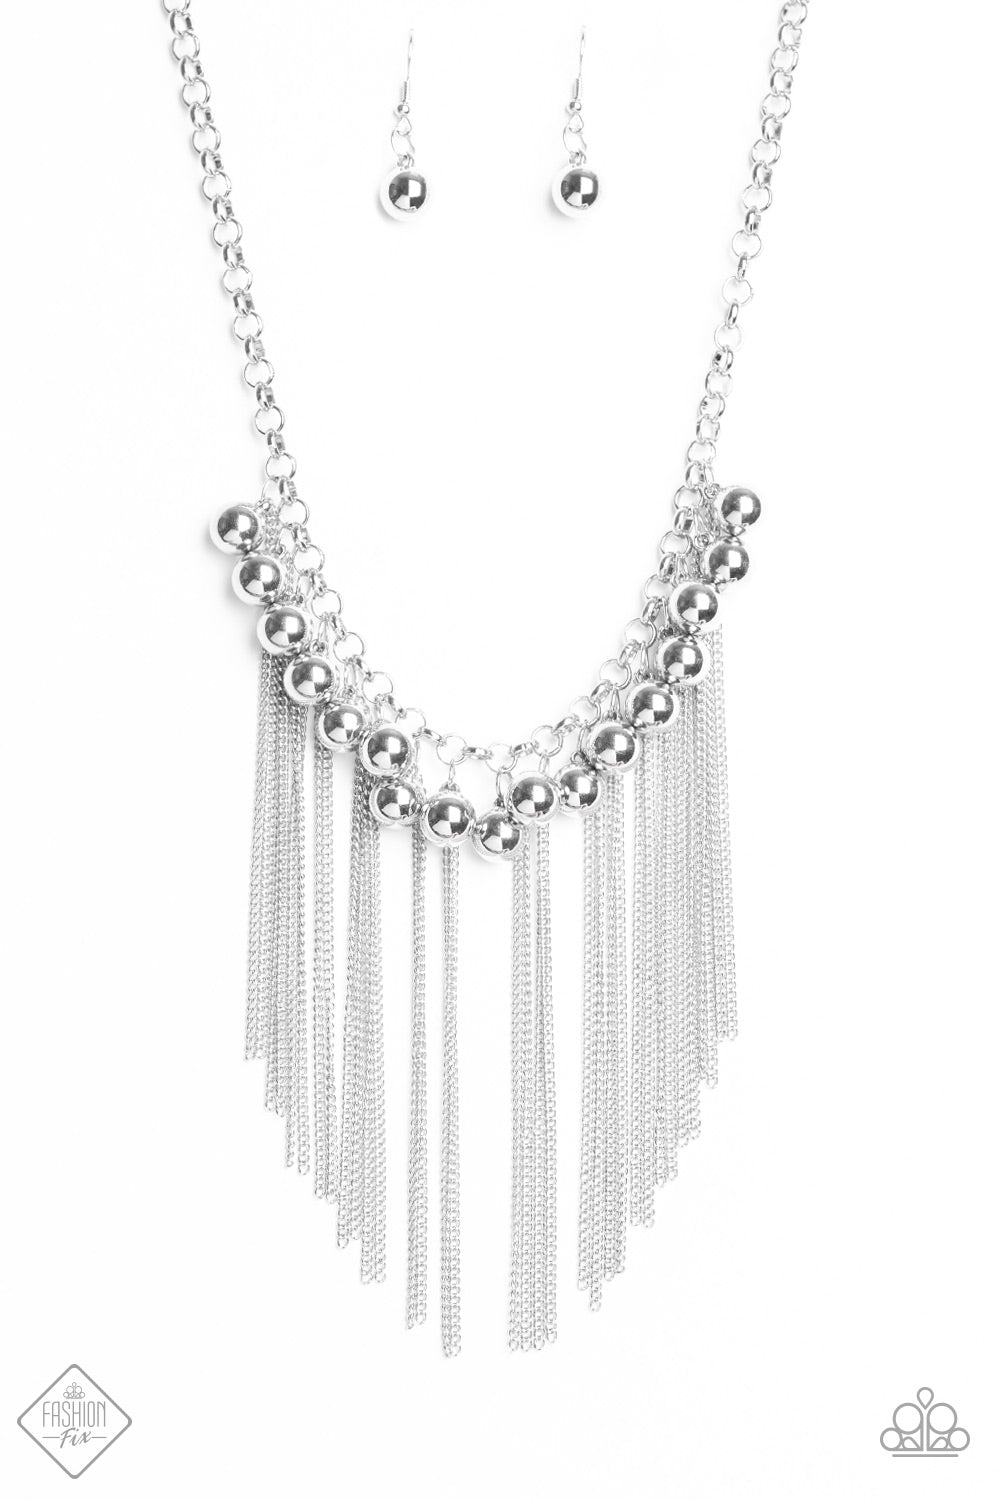 Paparazzi Accessories - Powerhouse Prowl - Silver Necklace